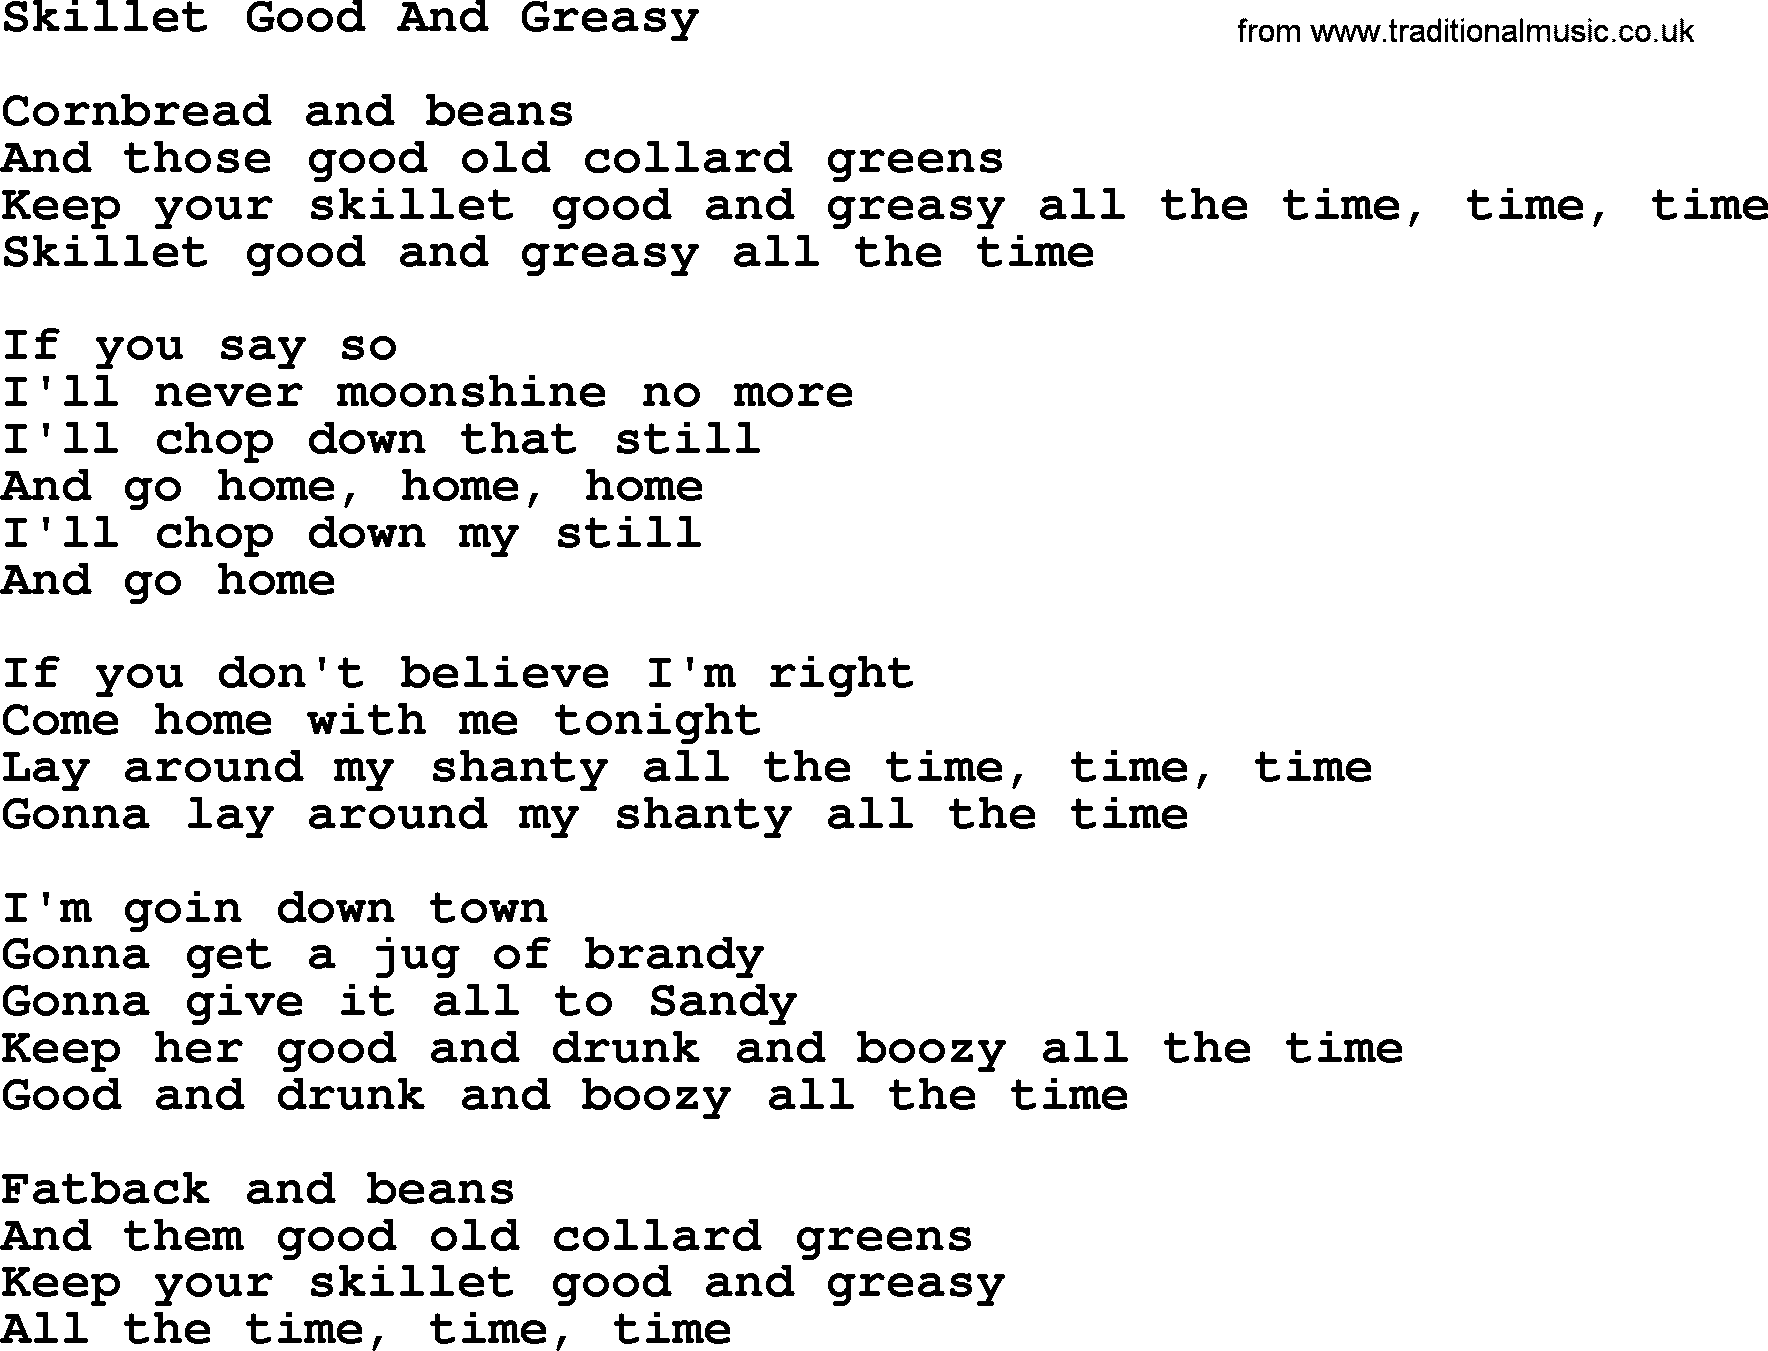 The Byrds song Skillet Good And Greasy, lyrics